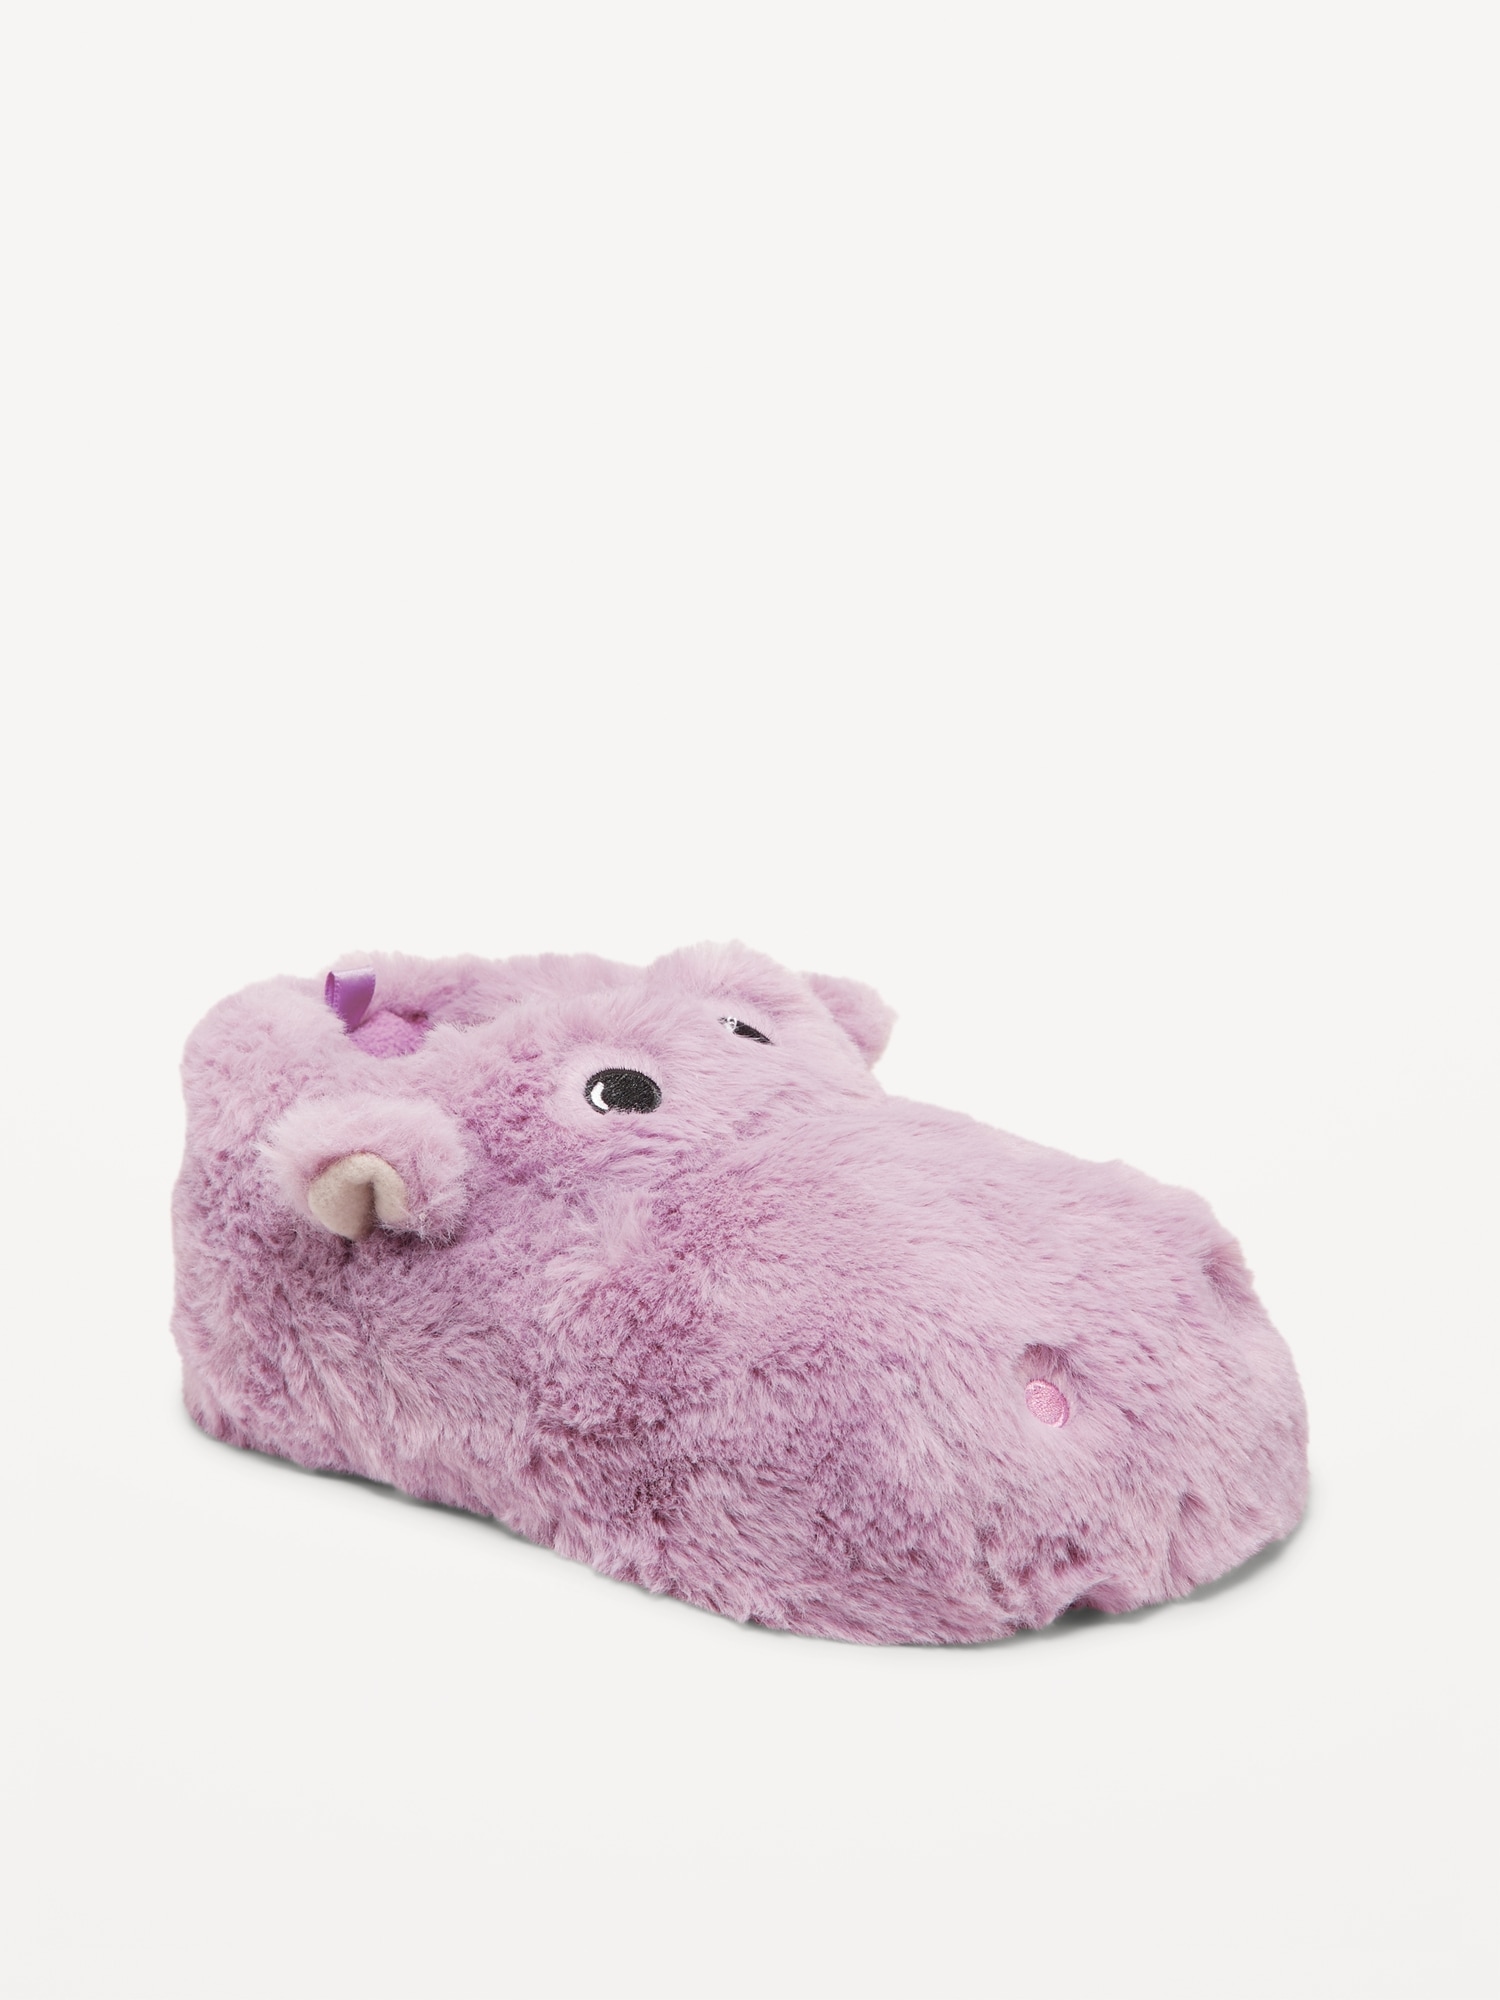 Unisex Faux-Fur Critter Slippers for Toddler